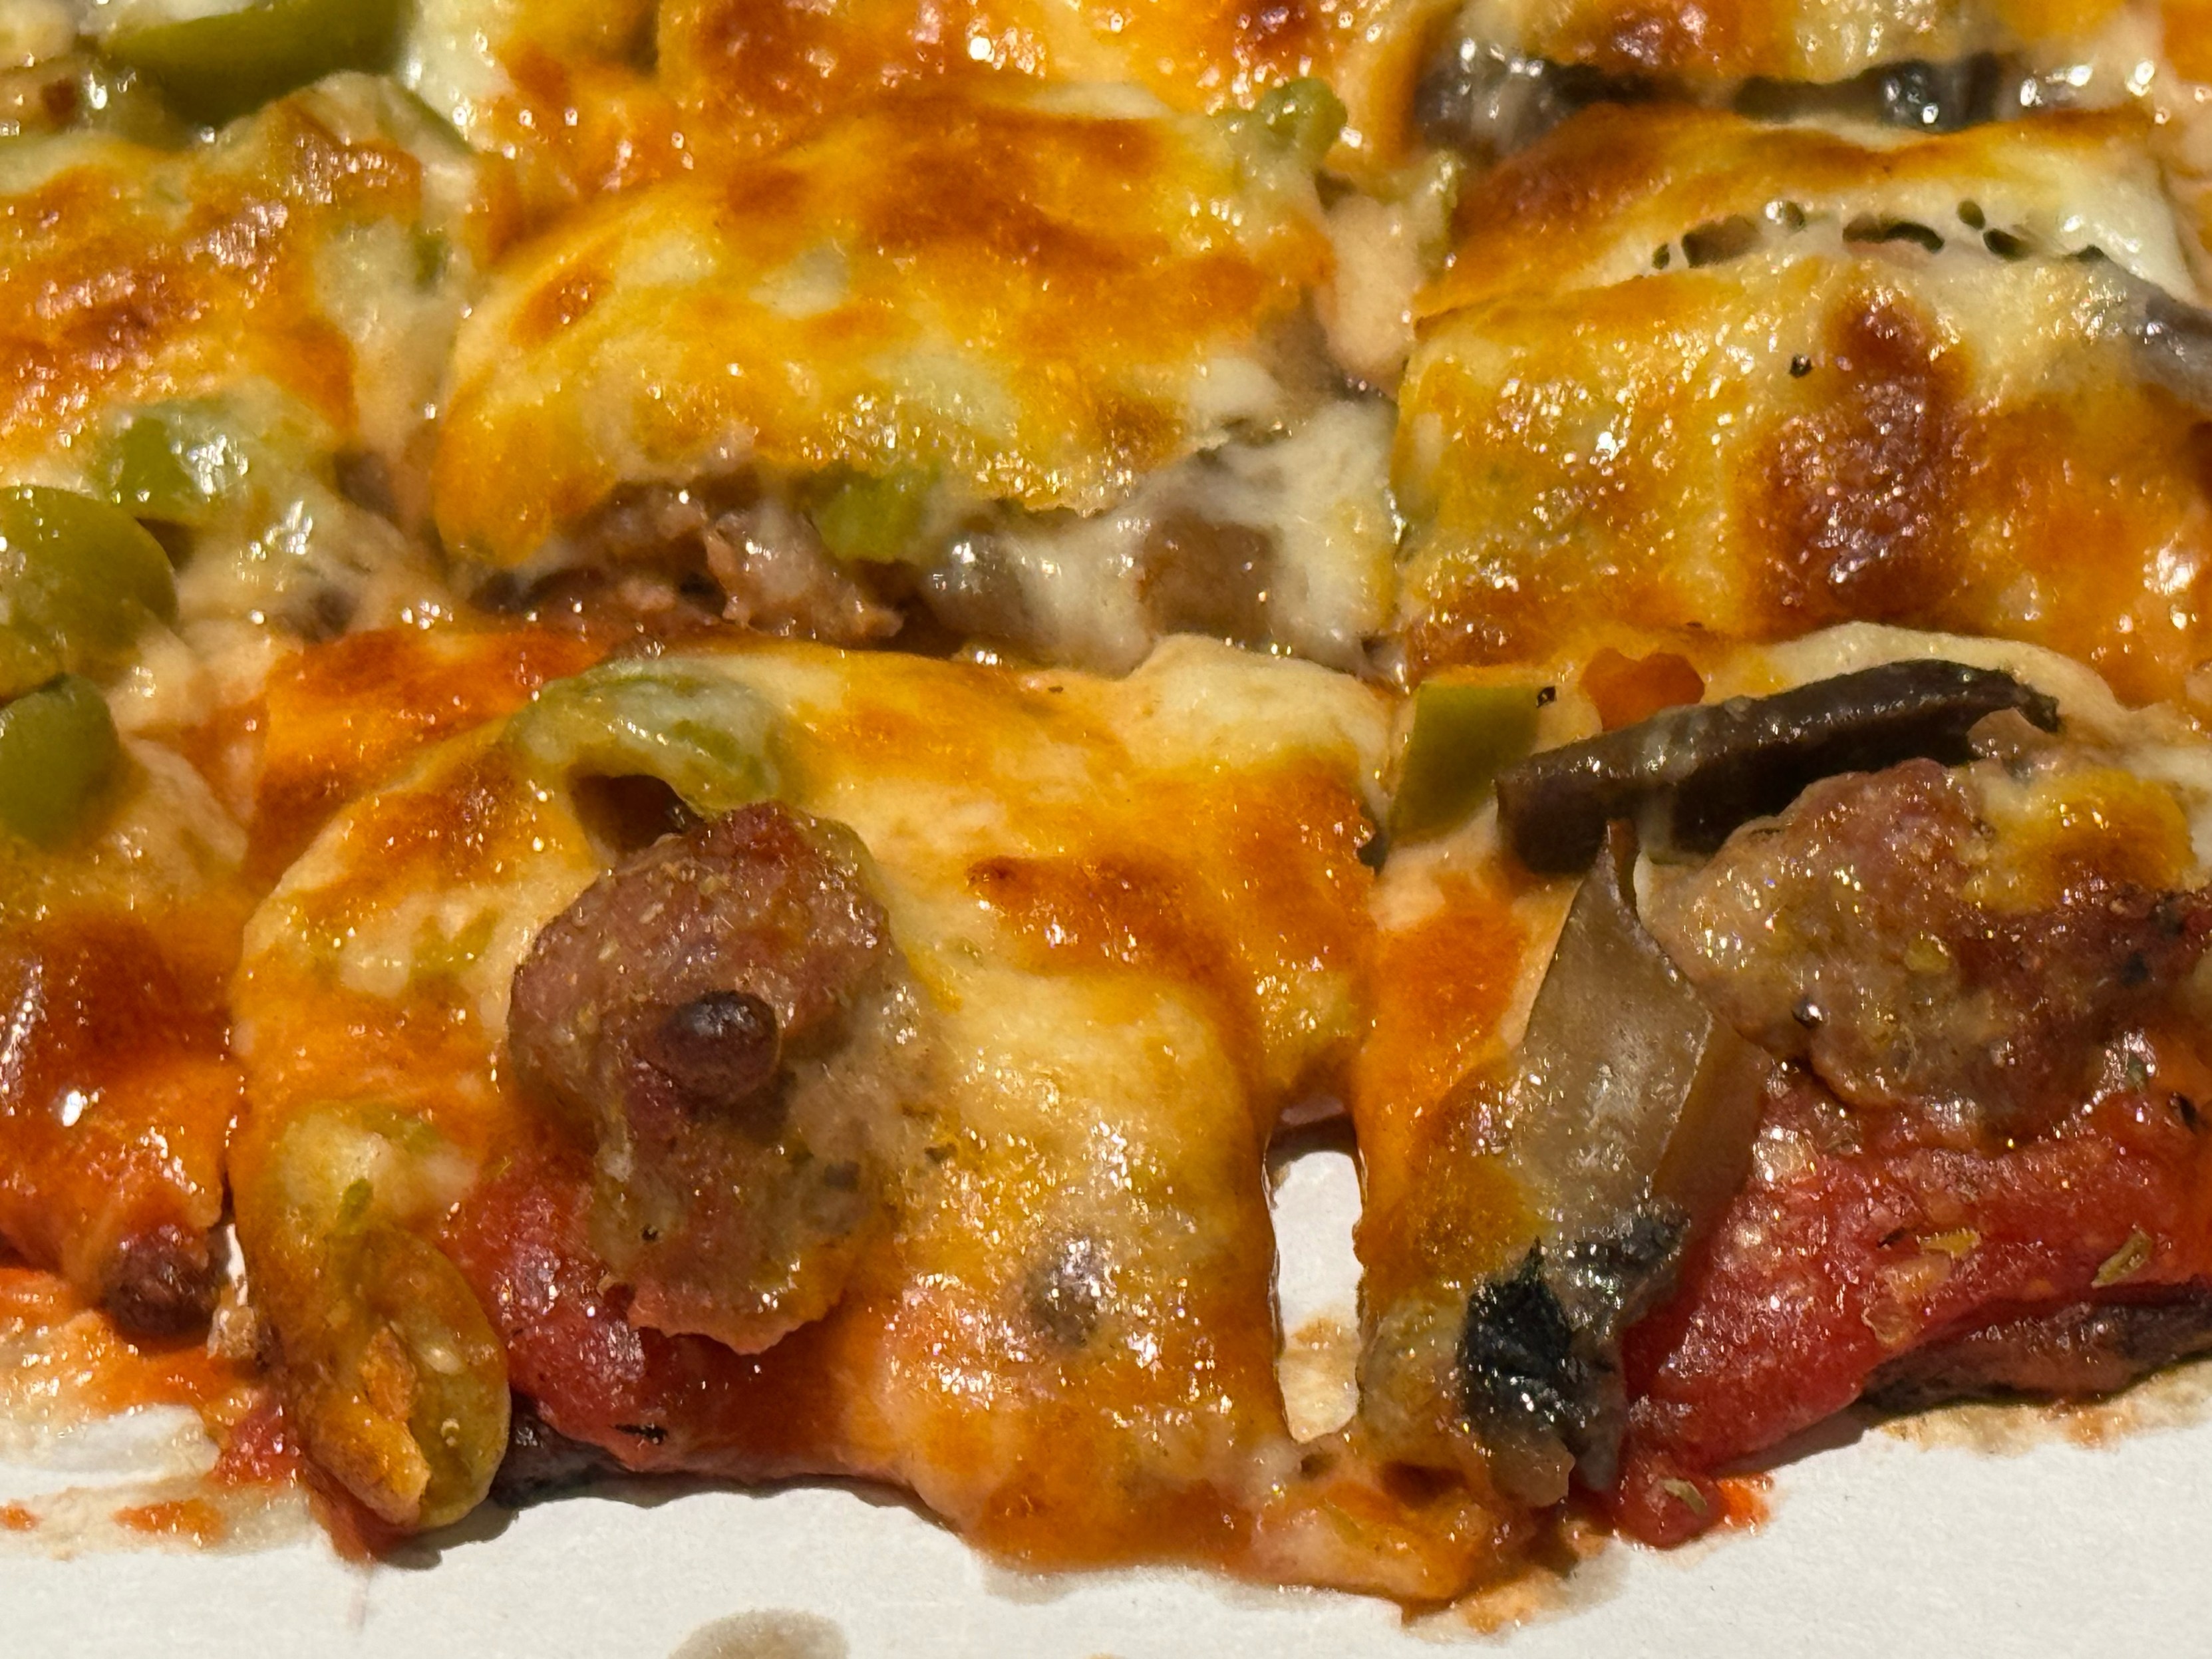 Close-up pic of a Carbone’s small 7-inch pizza with sausage, mushroom and green olive